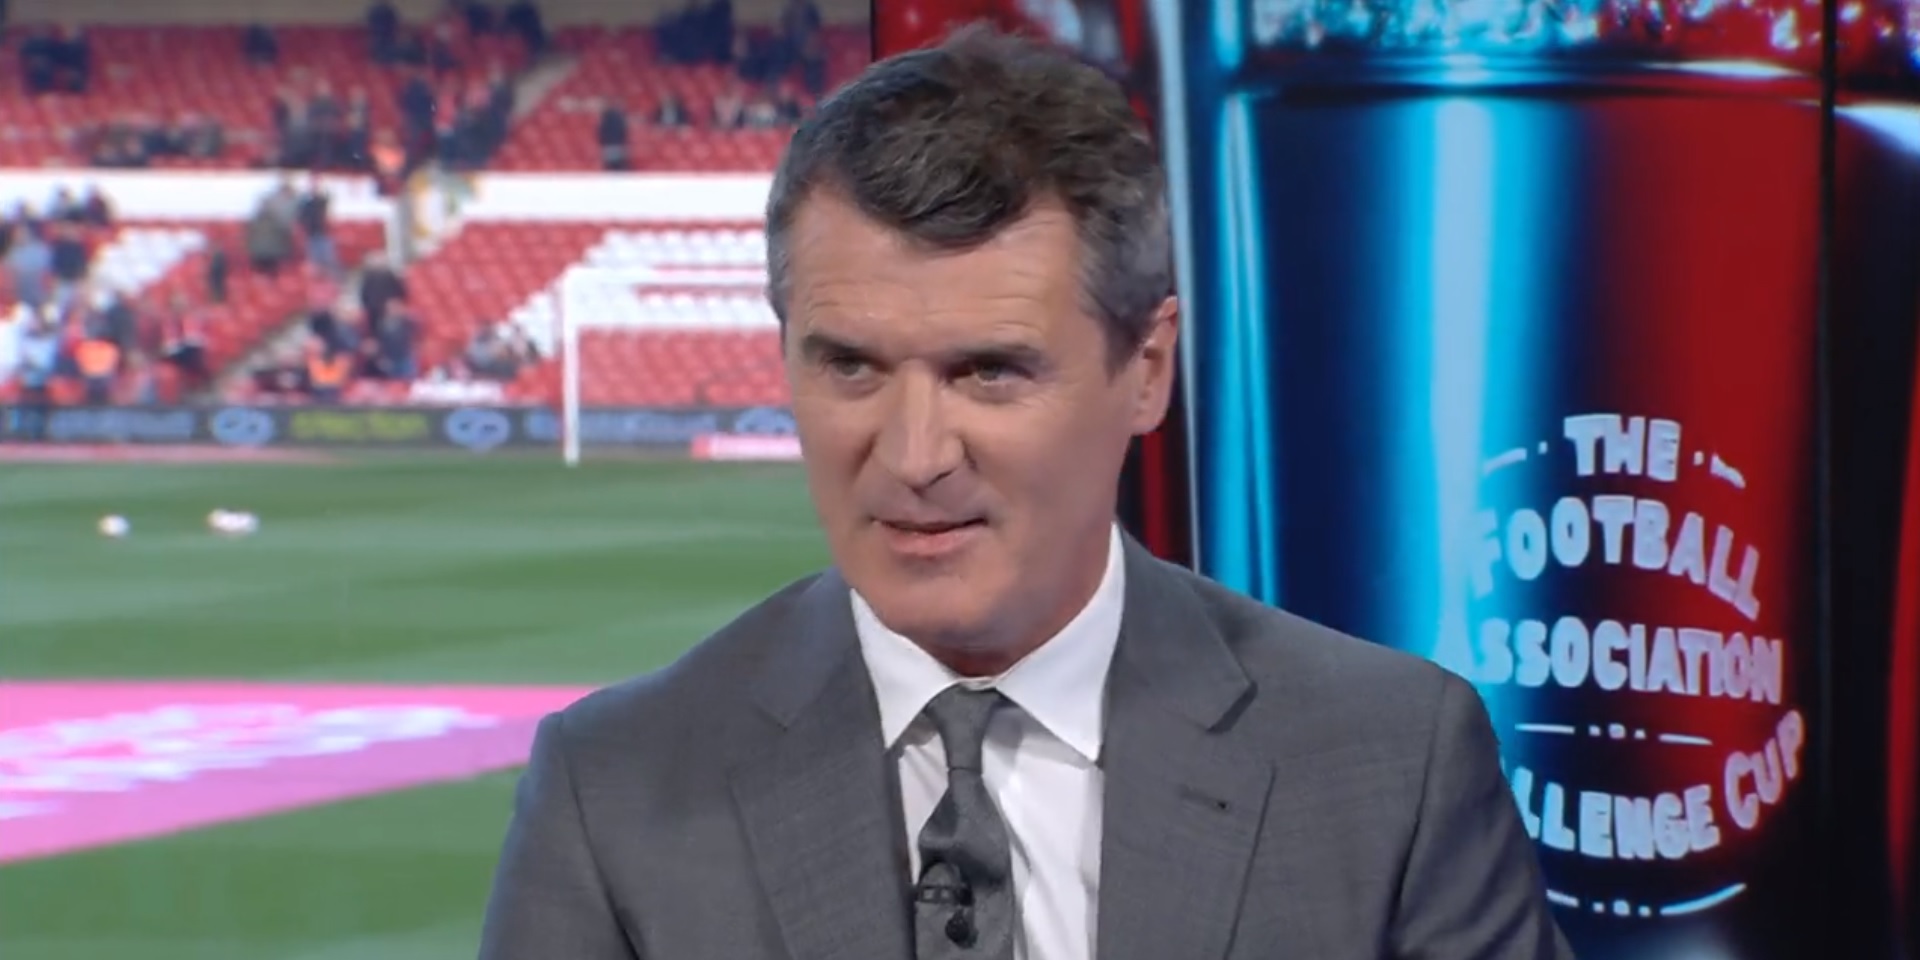 Roy Keane shares the truth behind Jurgen Klopp’s Liverpool success ahead of challenging trophy hunt